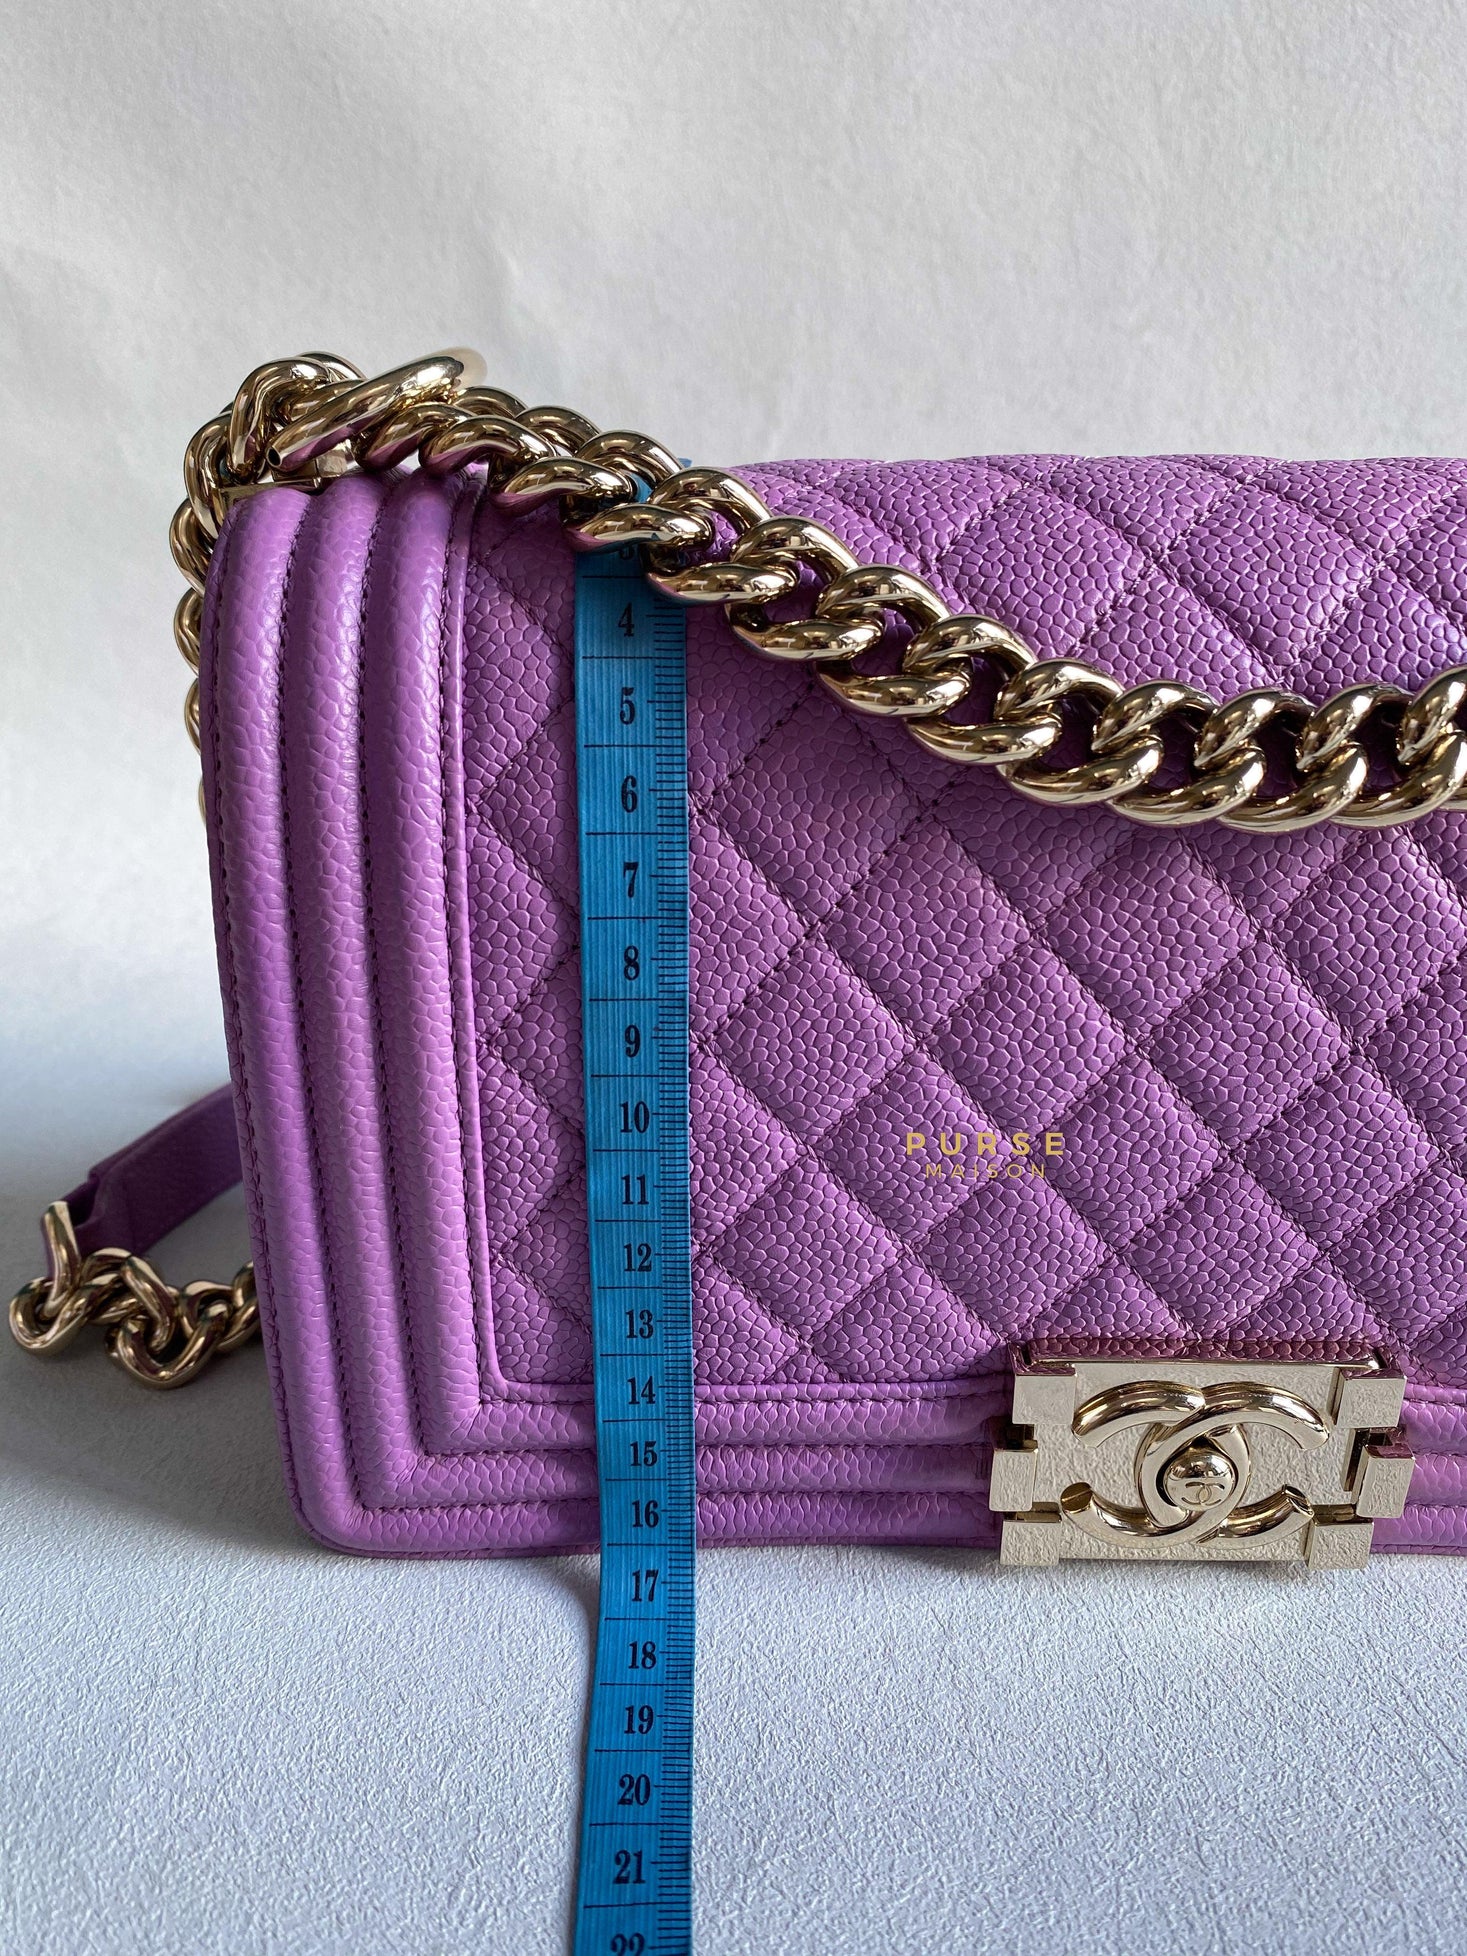 Chanel Boy Old Medium in Purple Caviar Leather and Light Gold Hardware (Series 29) | Purse Maison Luxury Bags Shop